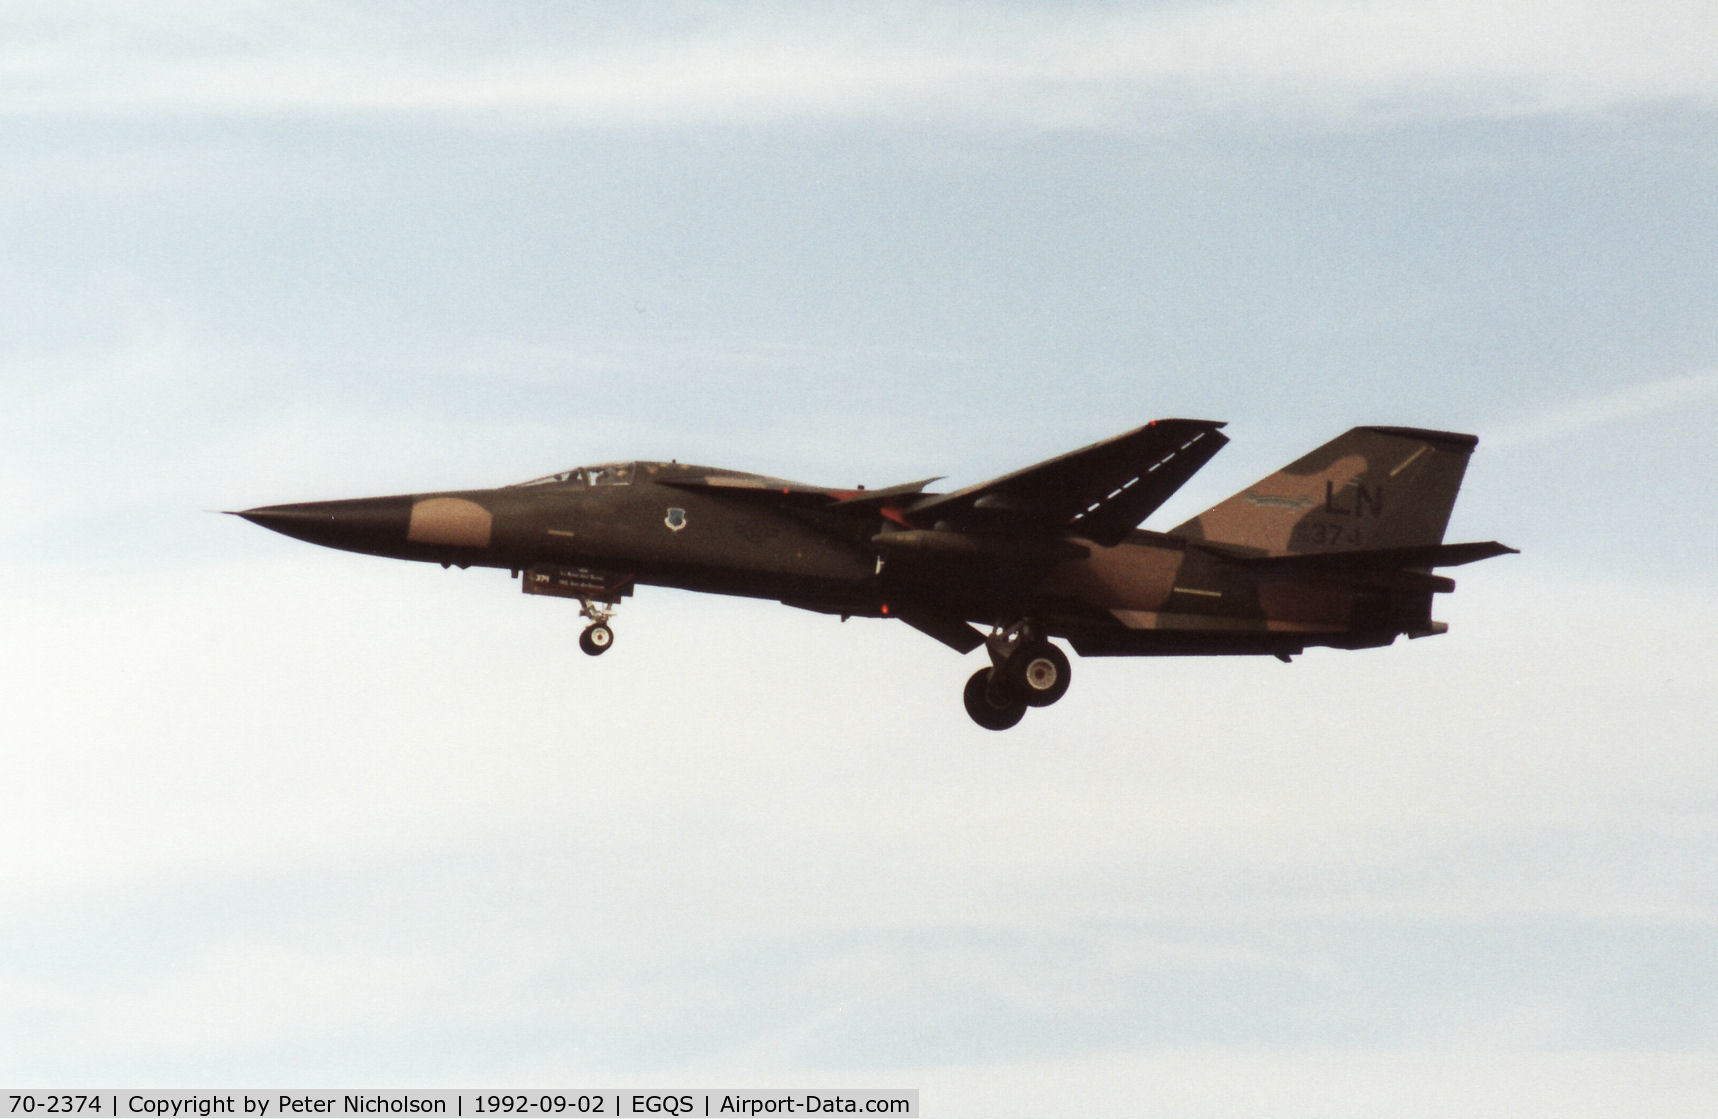 70-2374, 1970 General Dynamics F-111F Aardvark C/N E2-13, F-111F, callsign Amber 31, of 495th Tactical Fighter Squadron/48th Tactical Fighter Wing on approach to RAF Lossiemouth in September 1992.